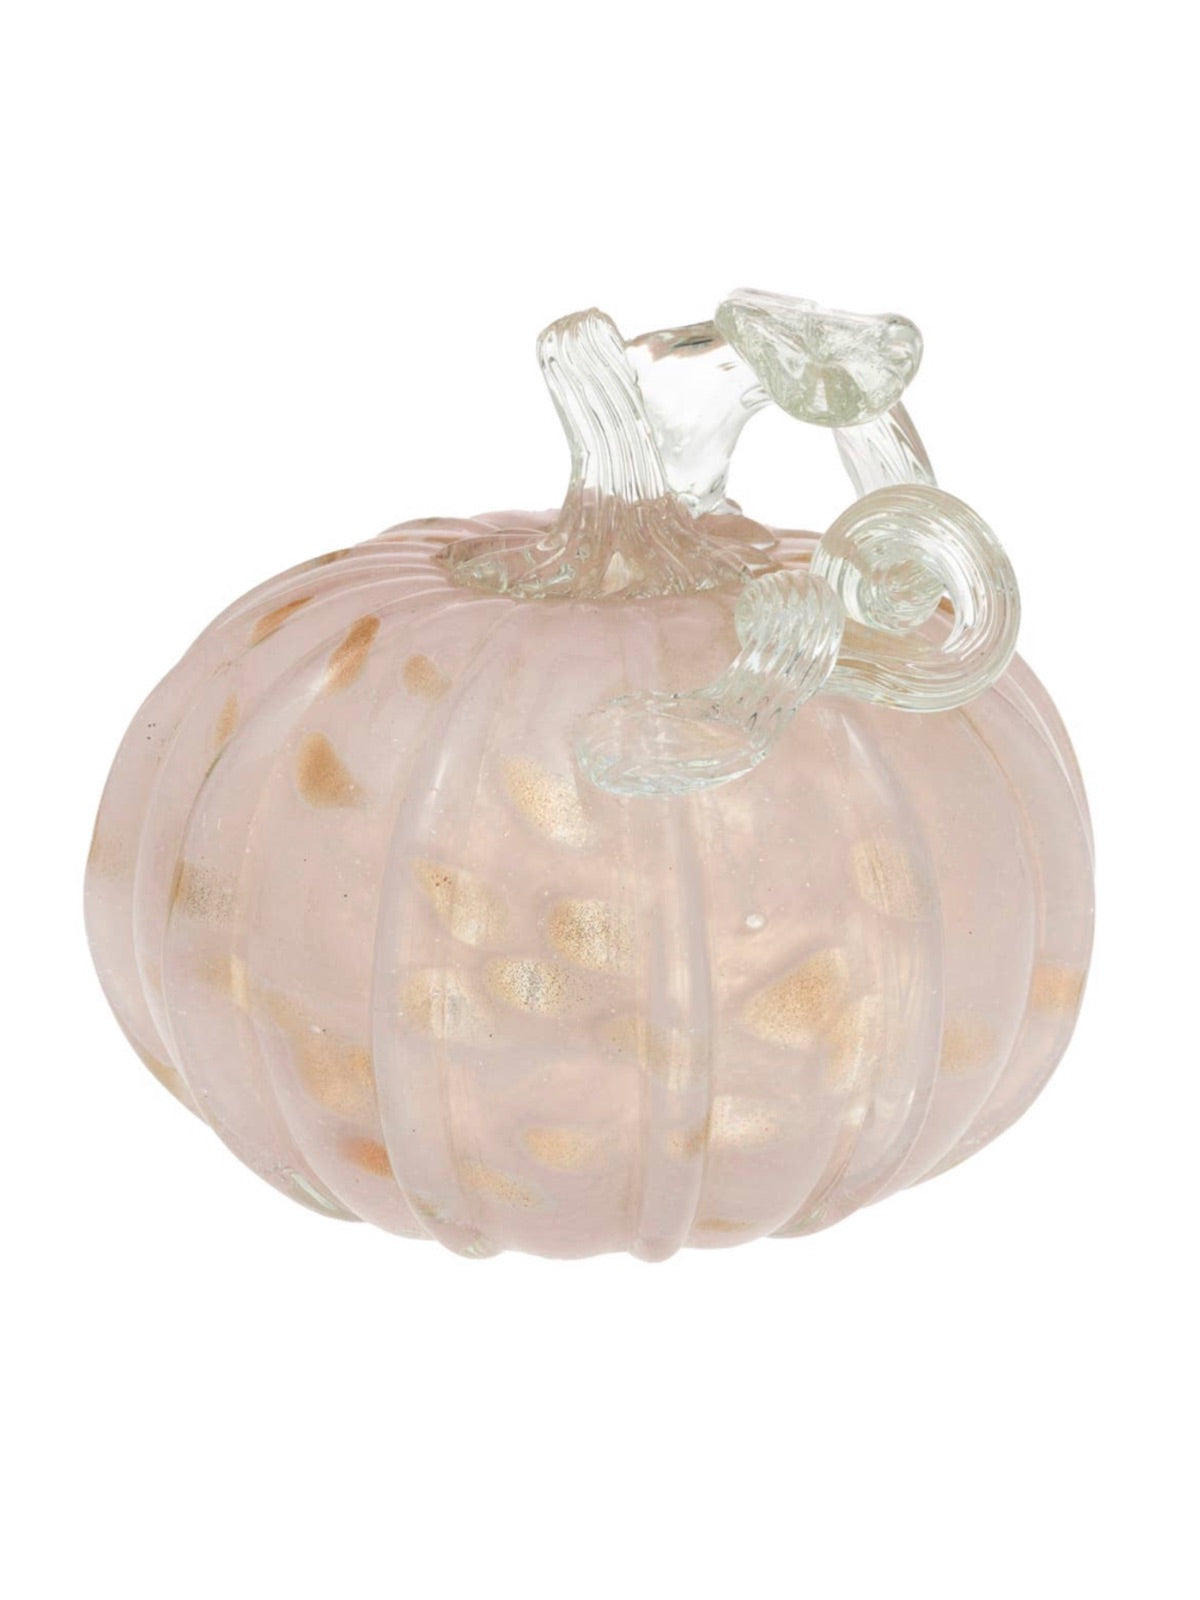 This Pink & Gold Glass Pumpkin is perfect for decorating your home during fall season! This hand-blown glass pumpkin features an abstract Pink and gold pattern with a curly clear stem.